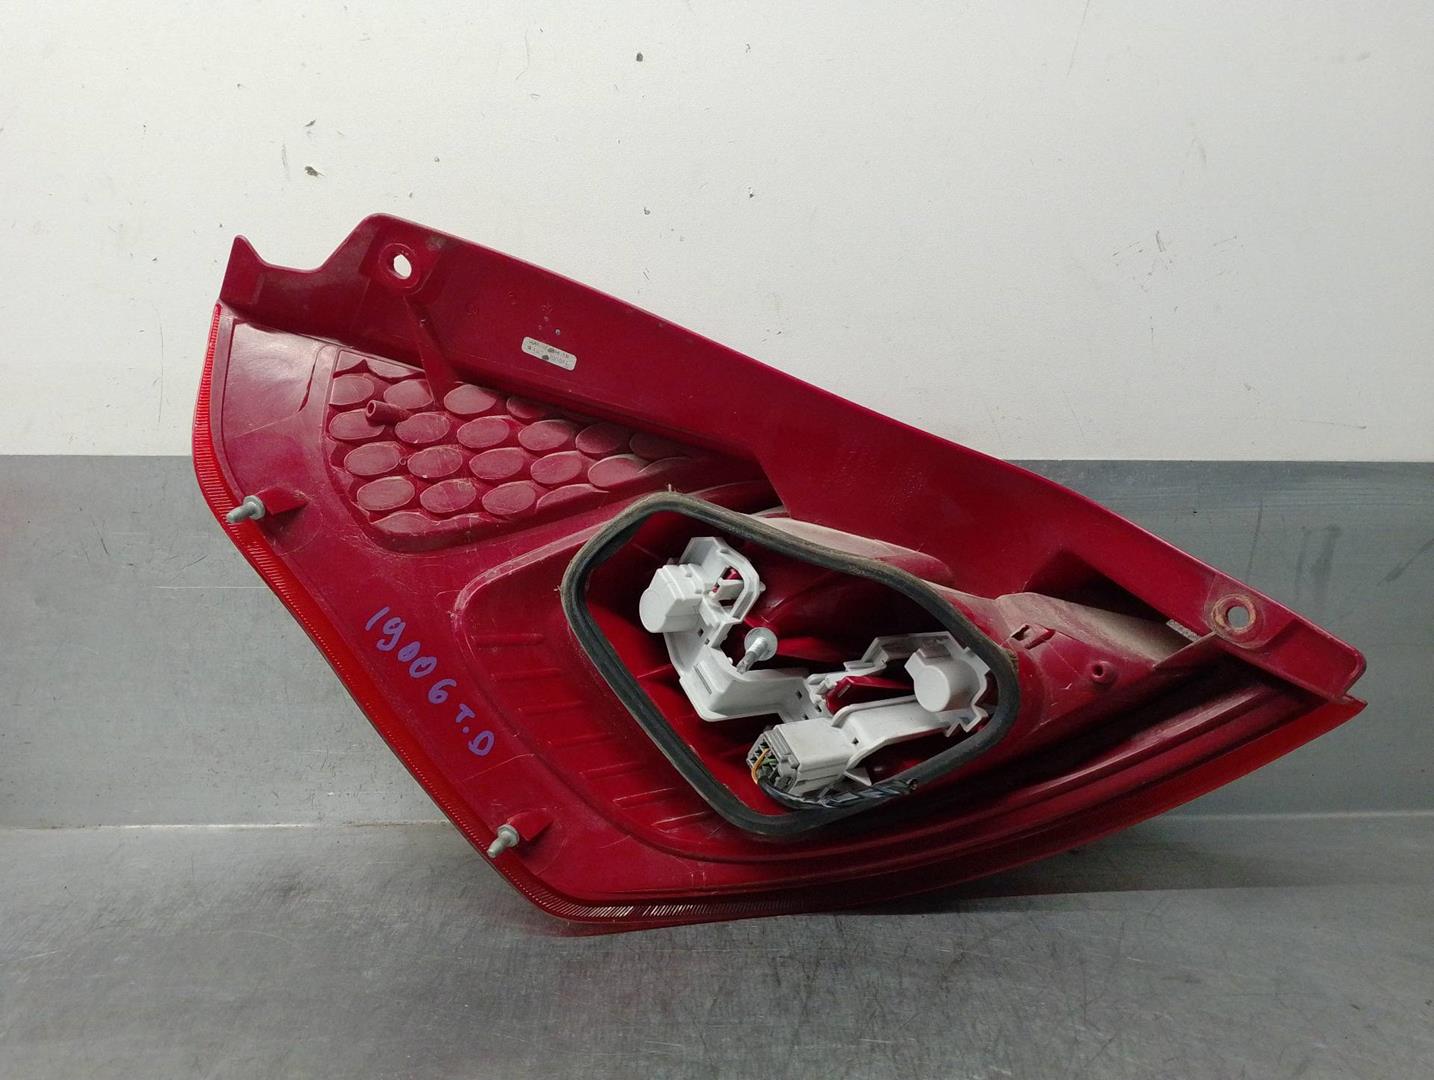 FORD Fiesta 5 generation (2001-2010) Rear Right Taillight Lamp 8A6113404A, 5PUERTAS 21733099